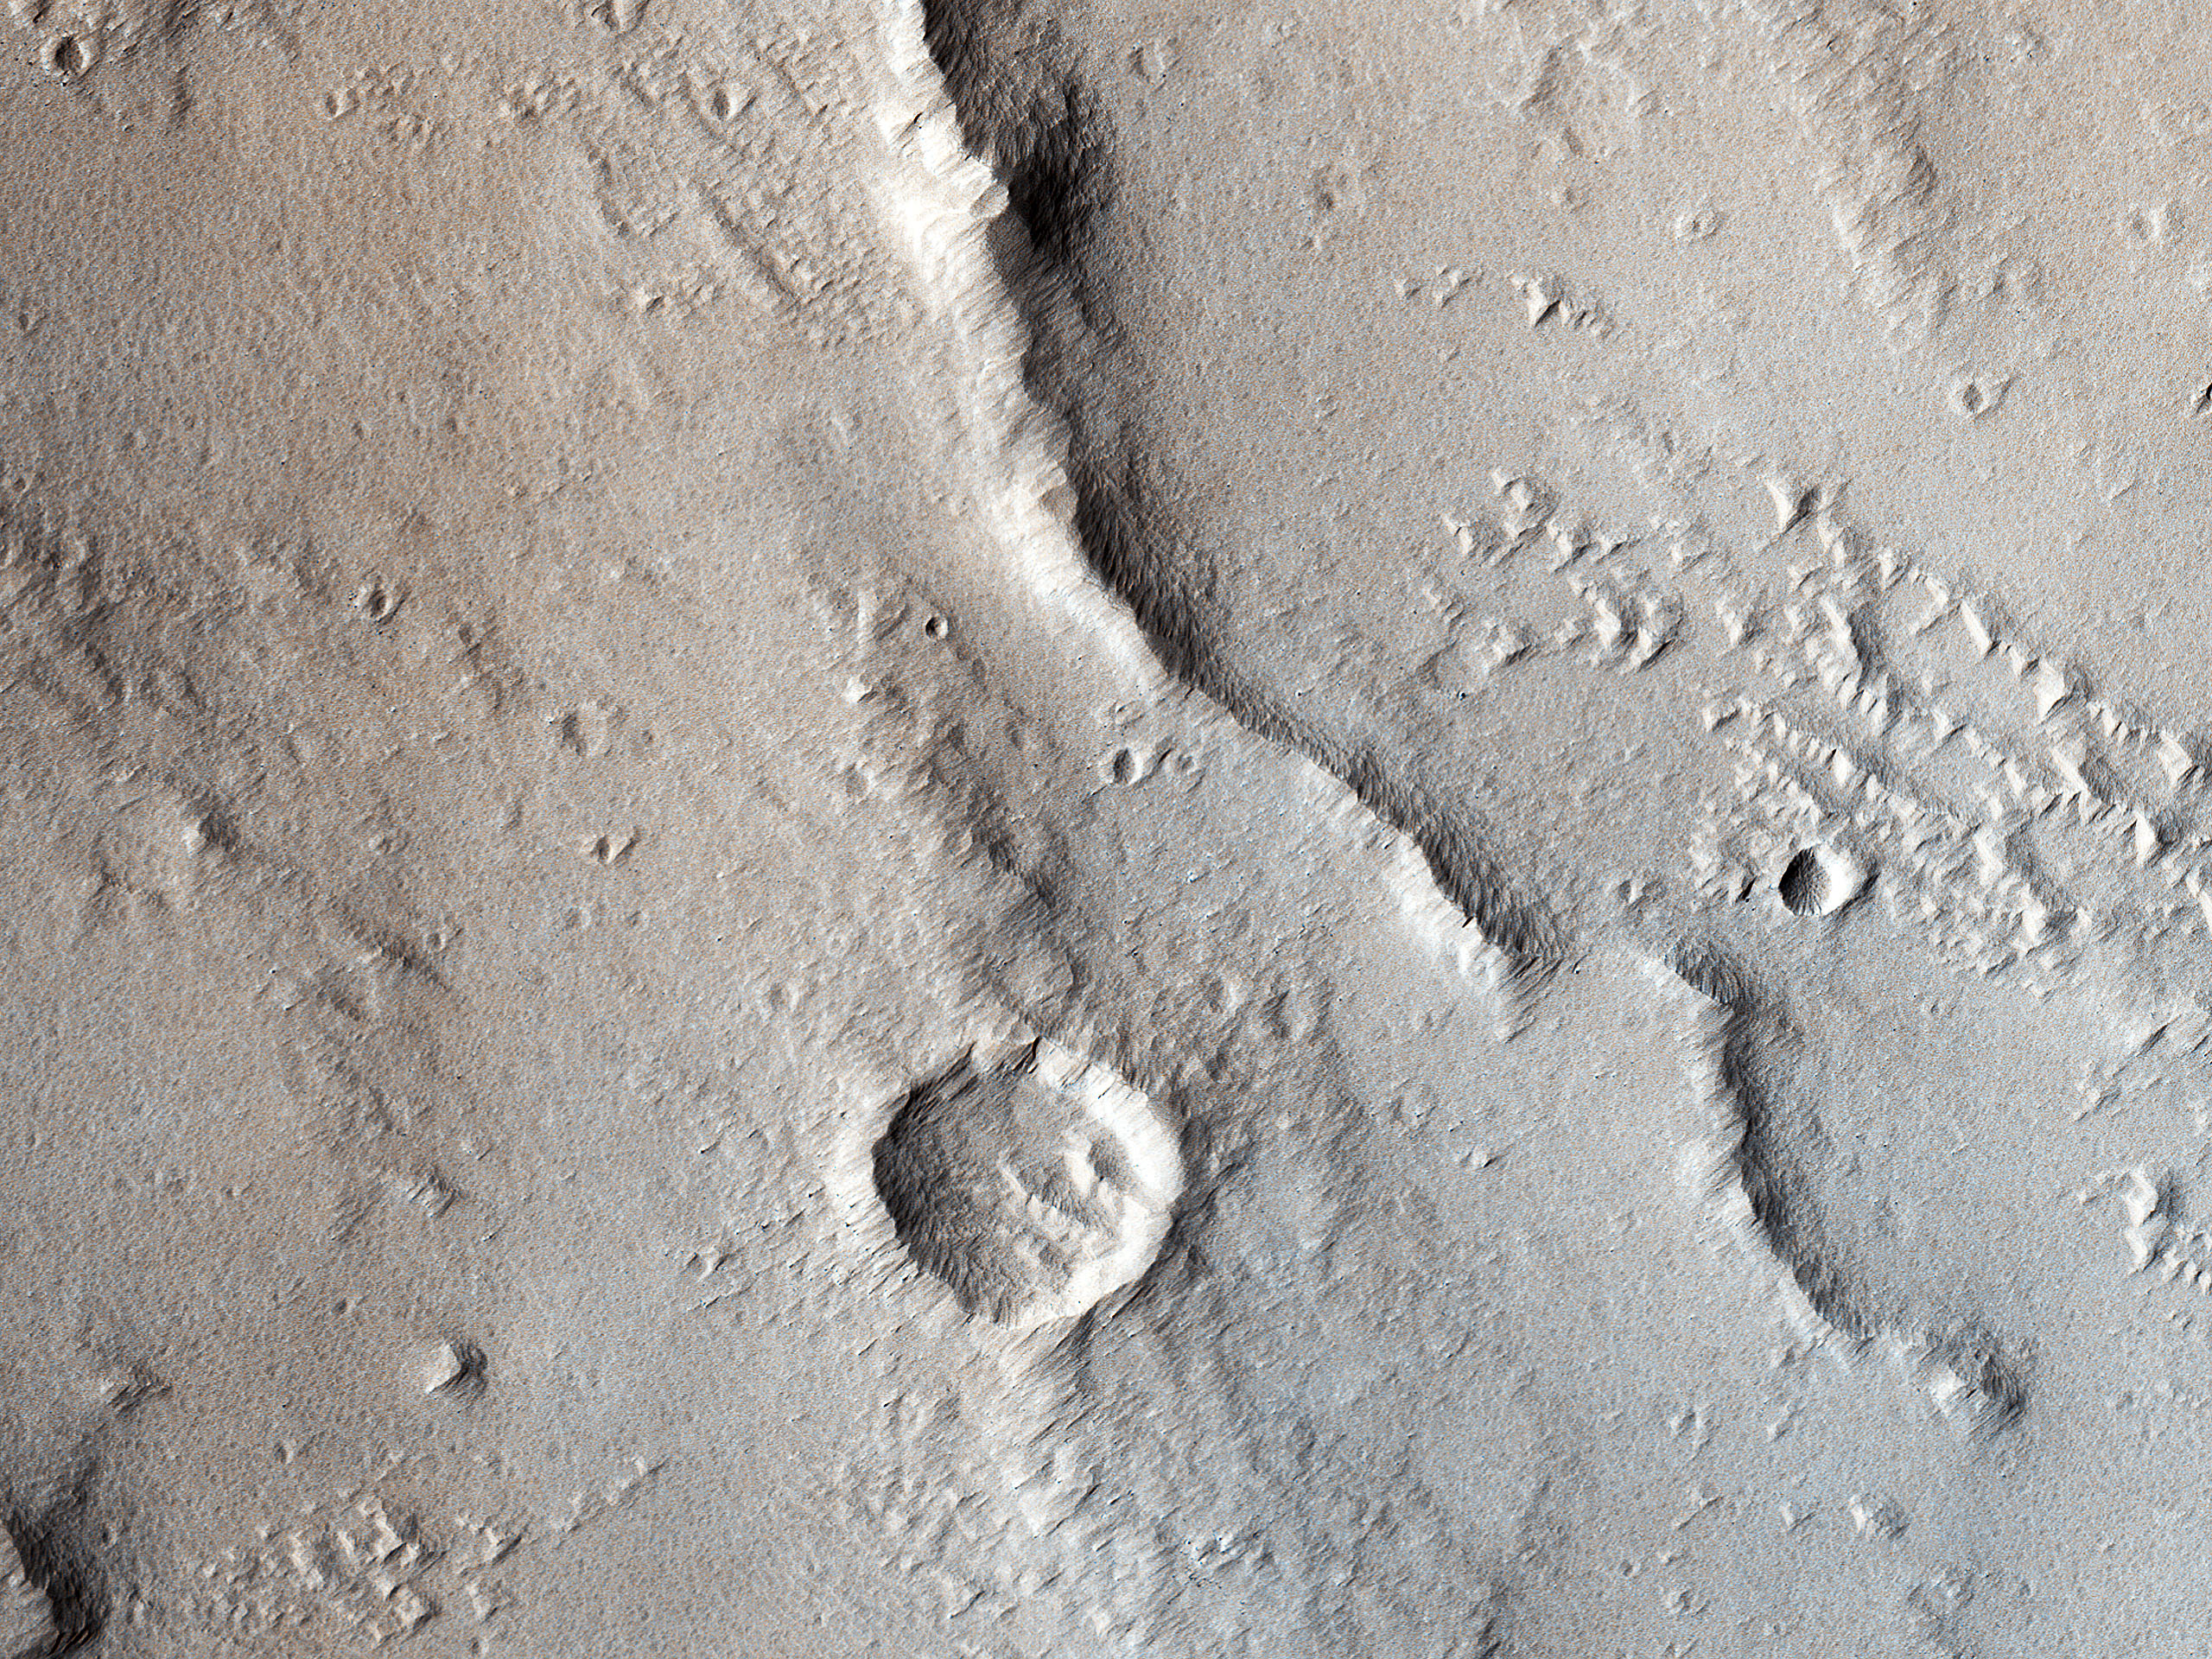 Wrinkle Ridges and Pit Craters